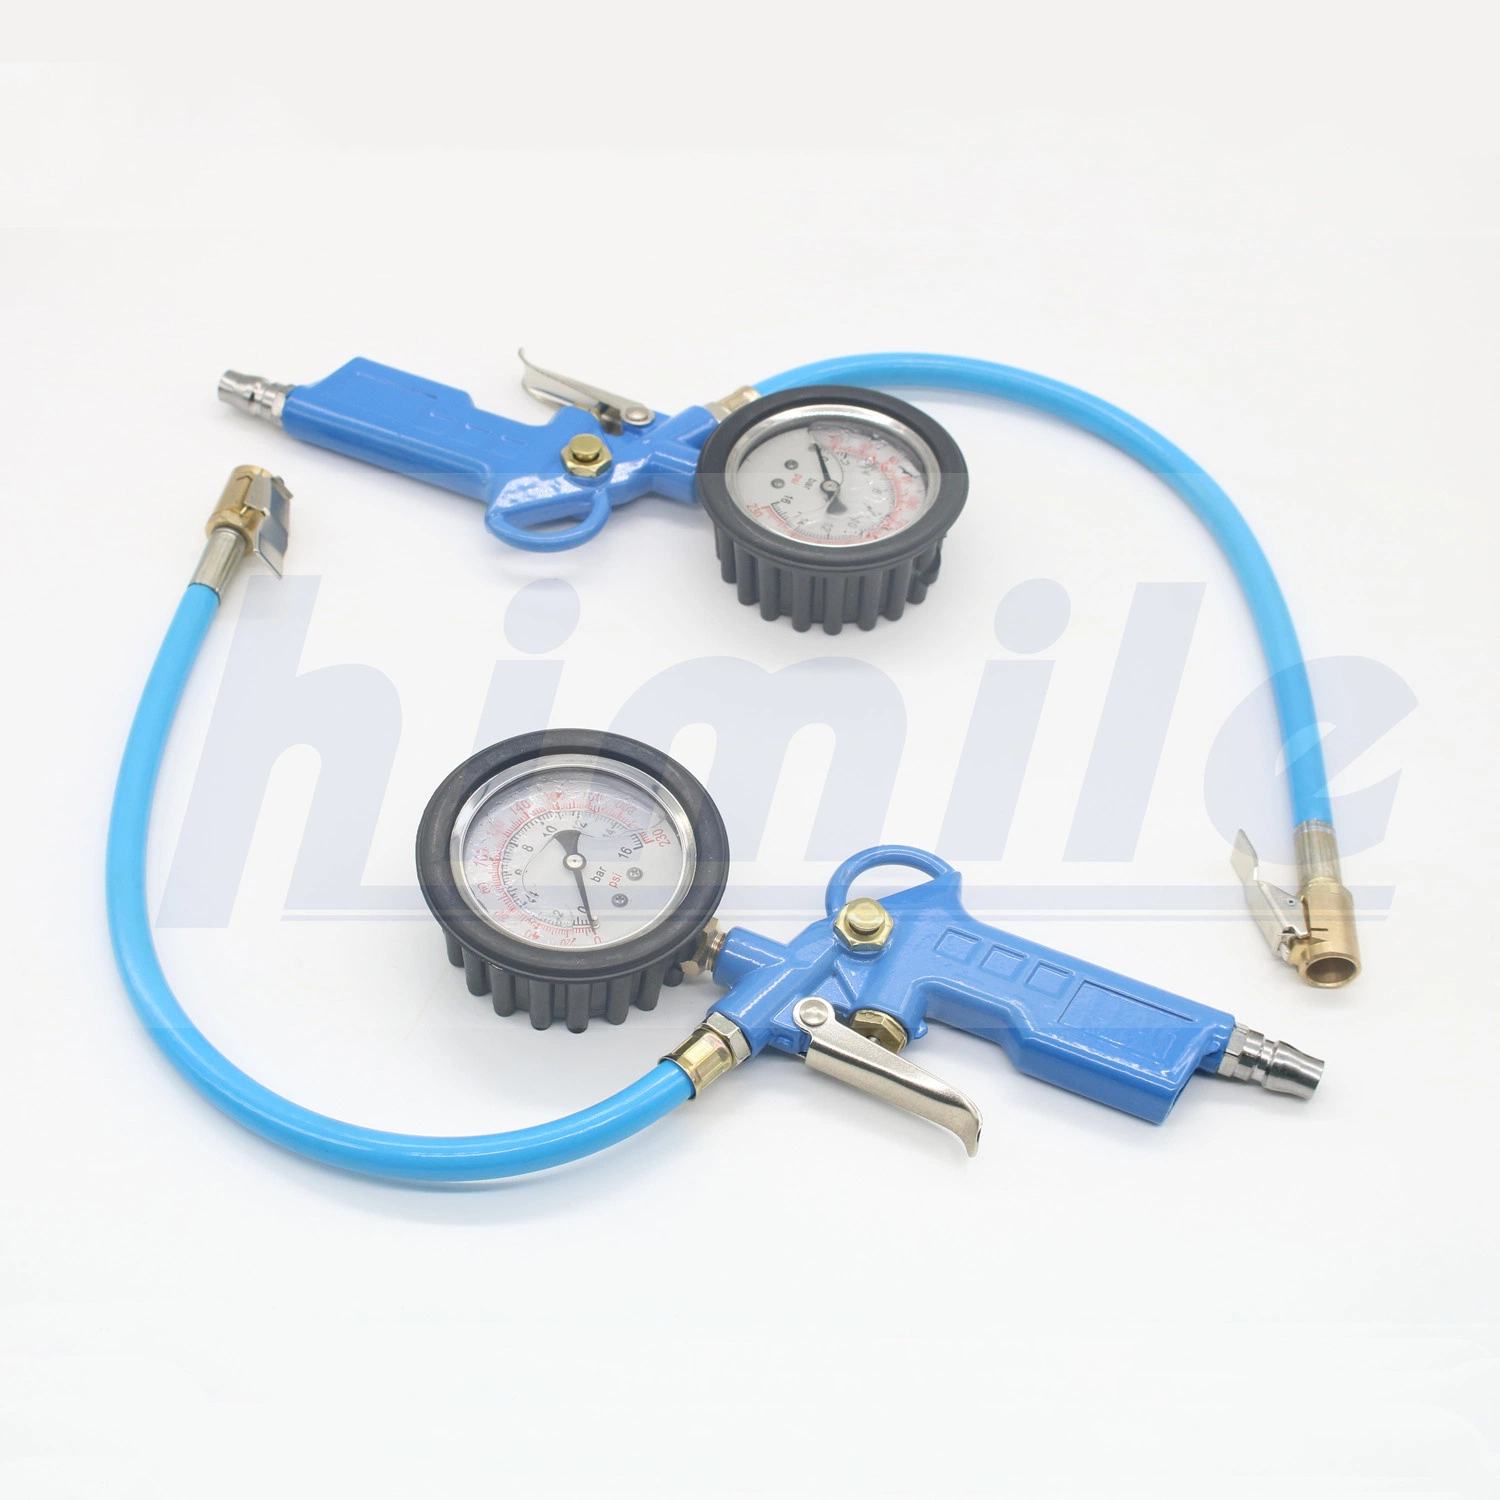 Himile High Quality Tire Pressure Gauge, Accurately Test Tire Pressure and Auto Parts.